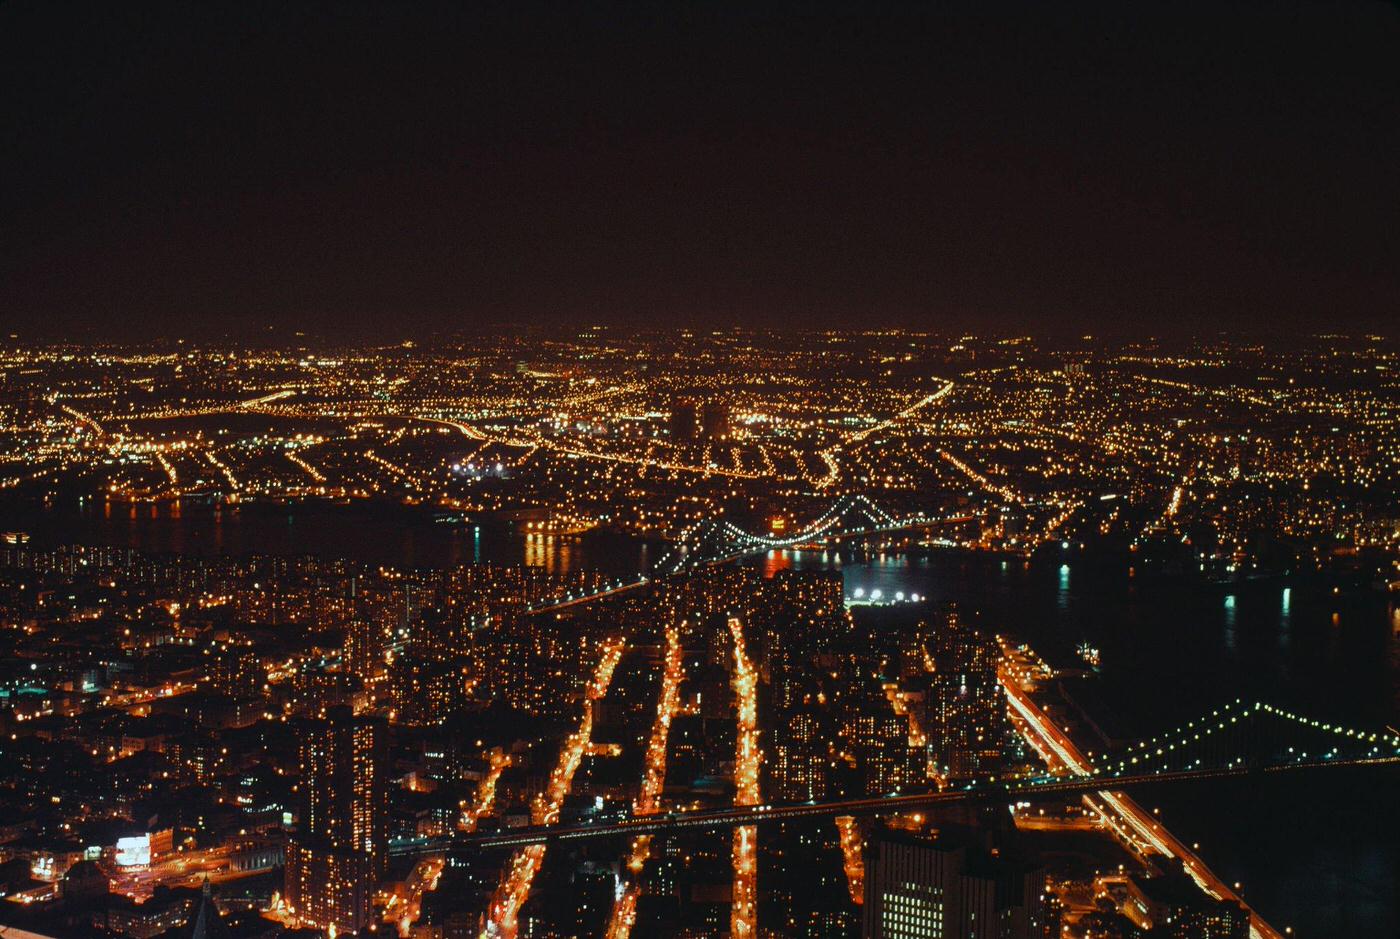 New York At Night, As Seen From The Top Of The World Trade Center, Manhattan, 1987